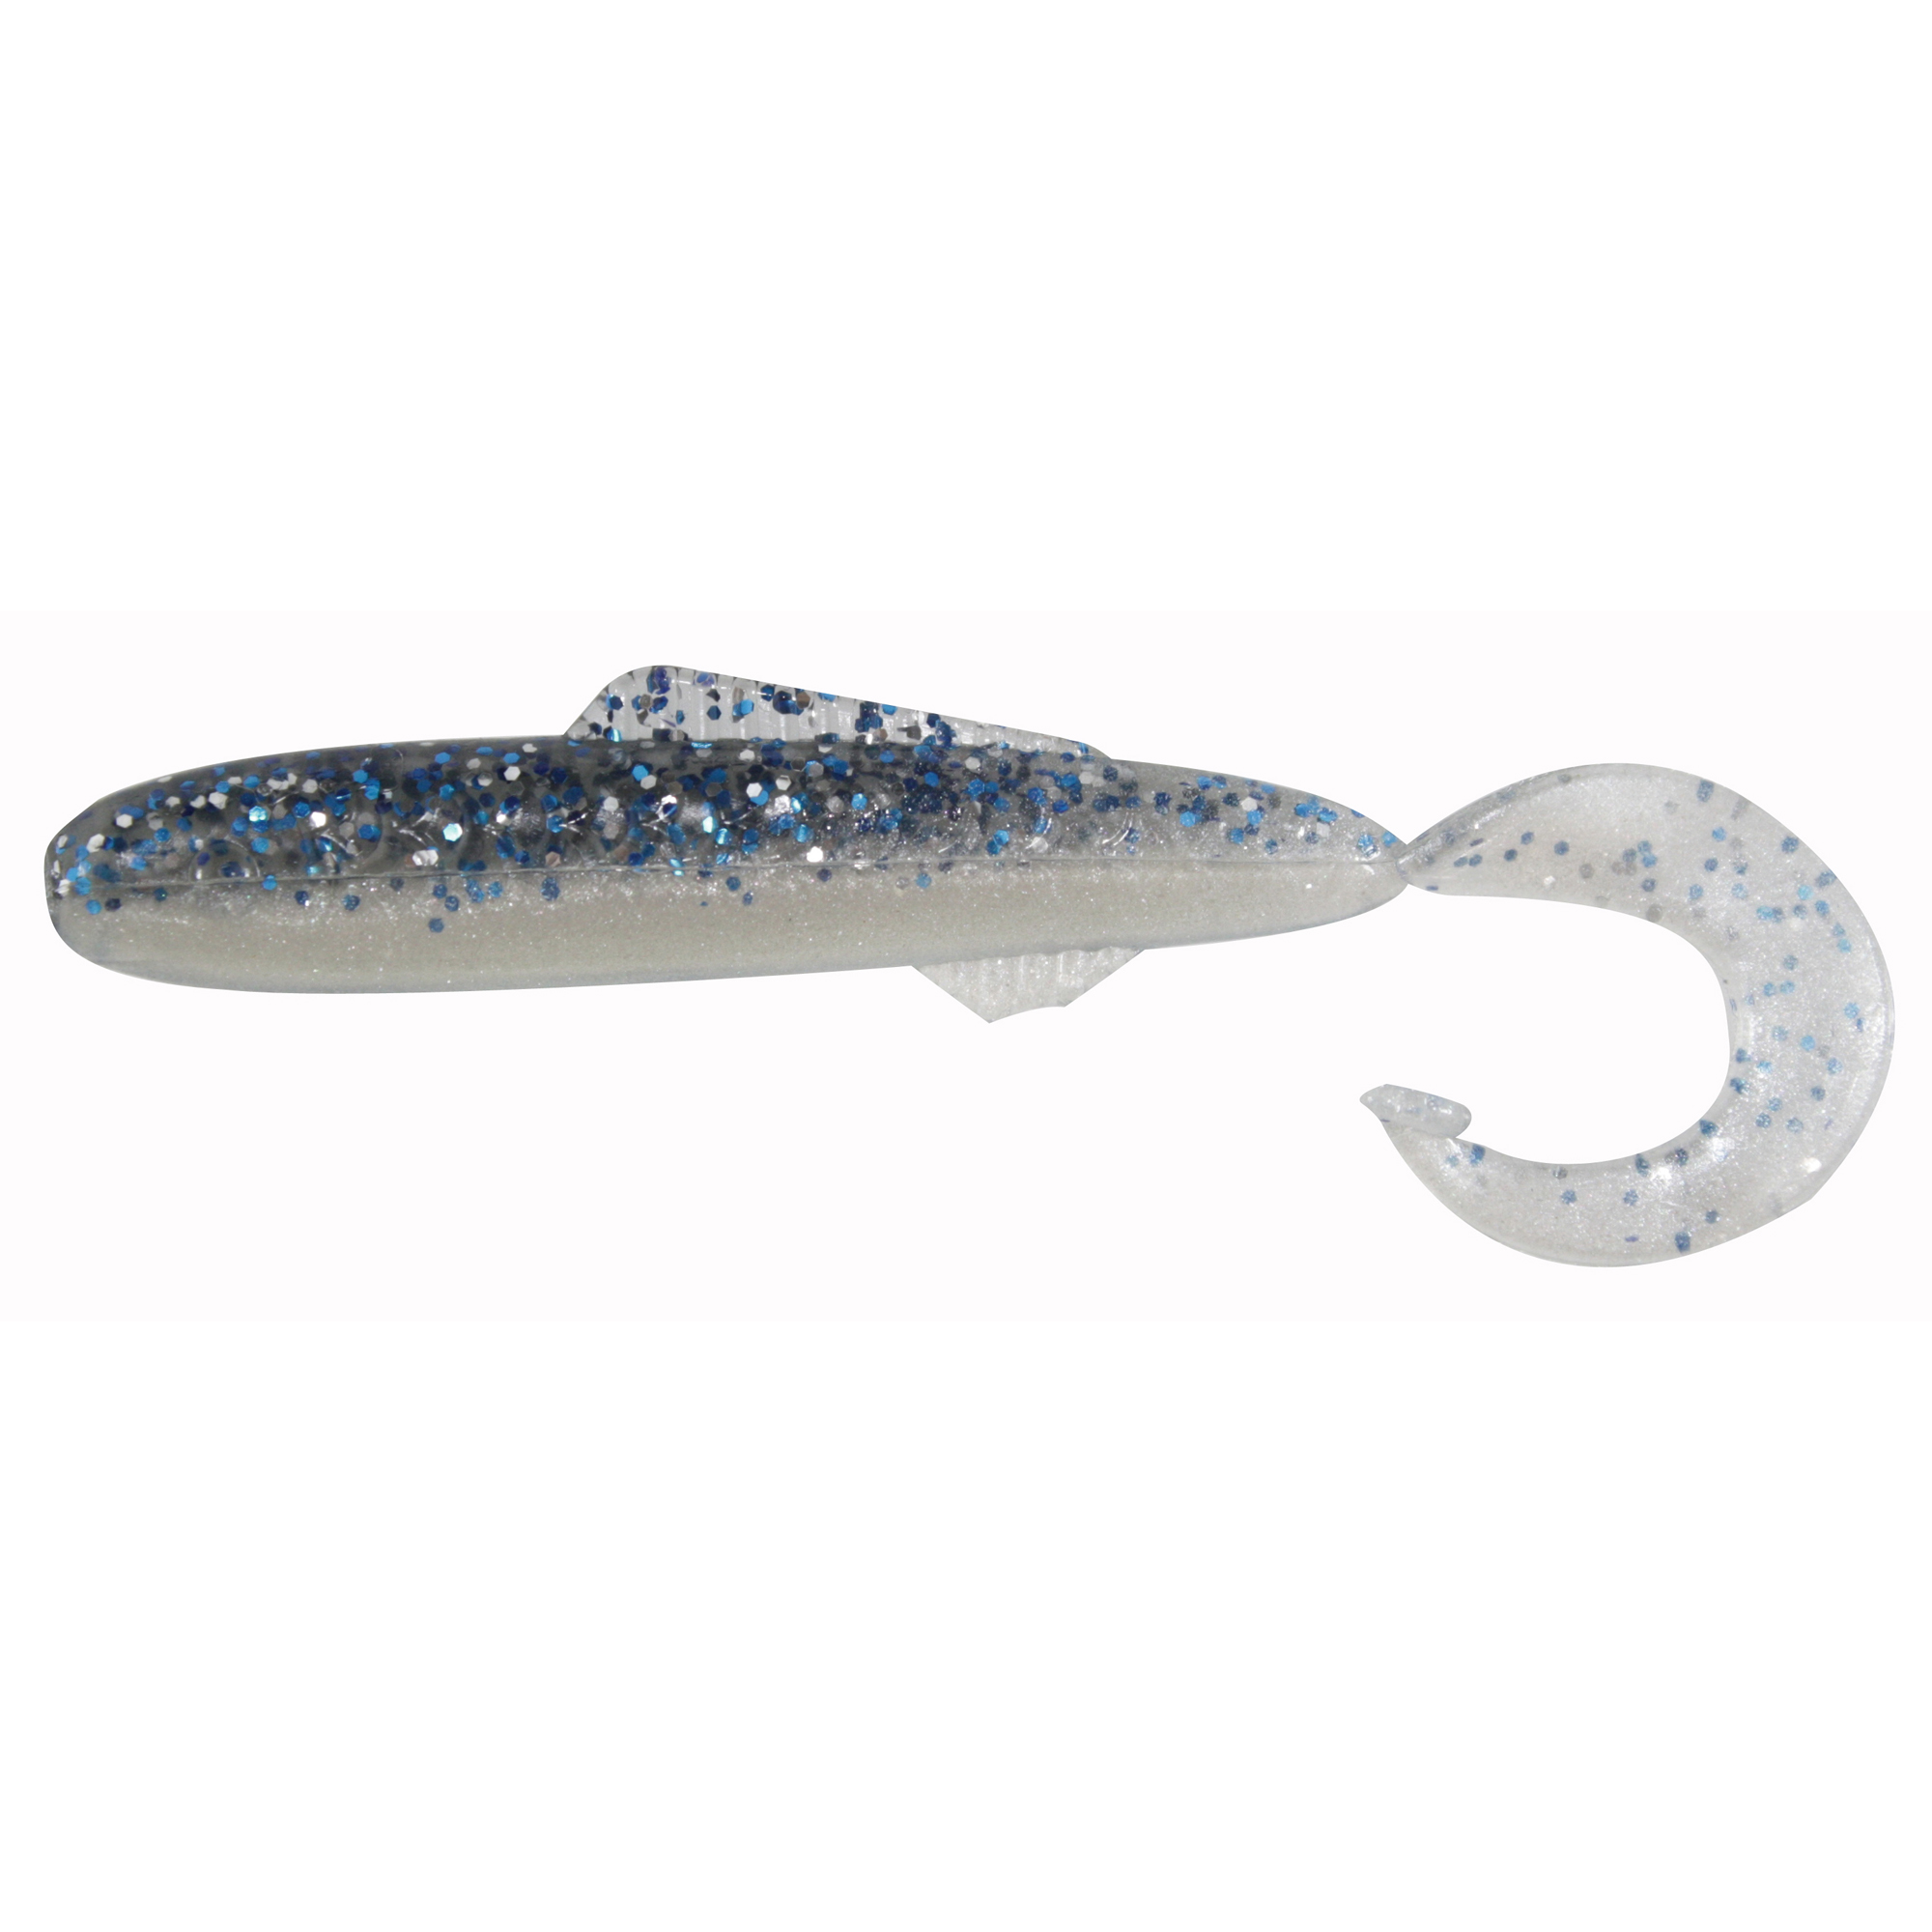 2 - Bobby Garland Crappie Baits - Baby Shad - 2 - 18/Pk - CLEARANCE! 